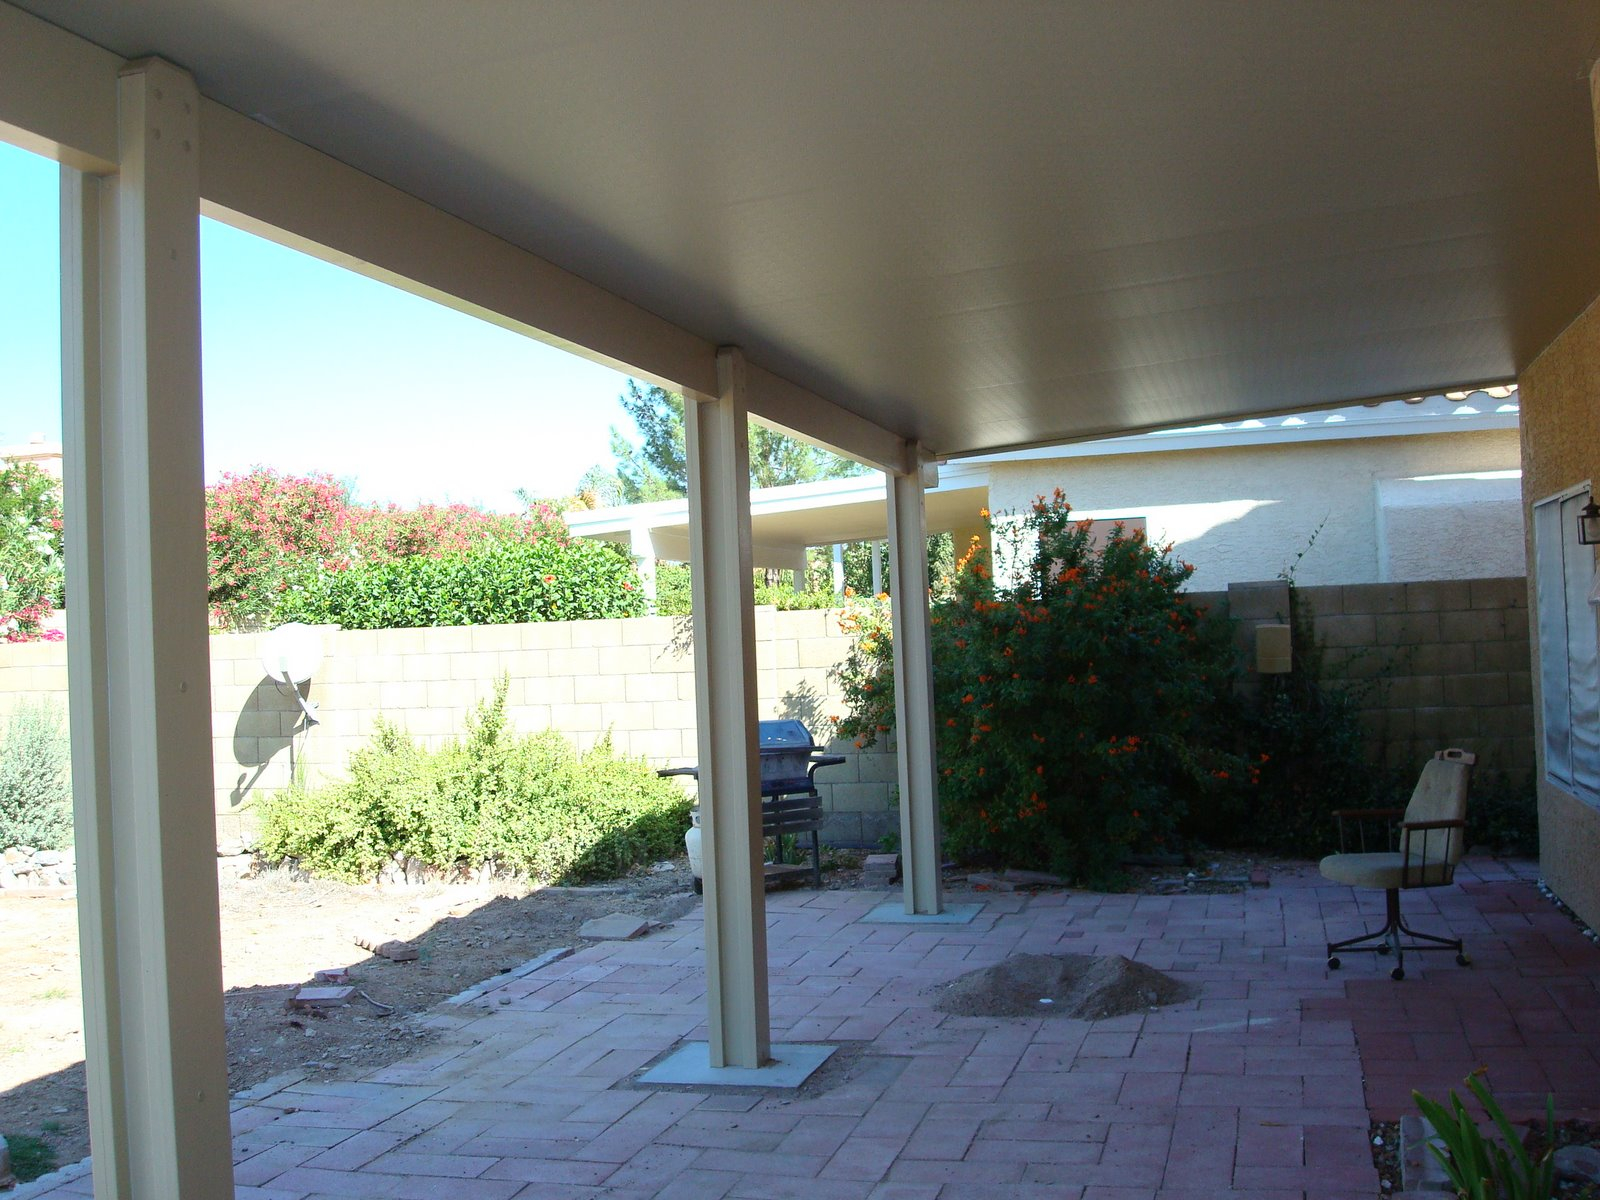 Patio Roofs In Arizona Why Aluminum Roof Leak Arizona within proportions 1600 X 1200